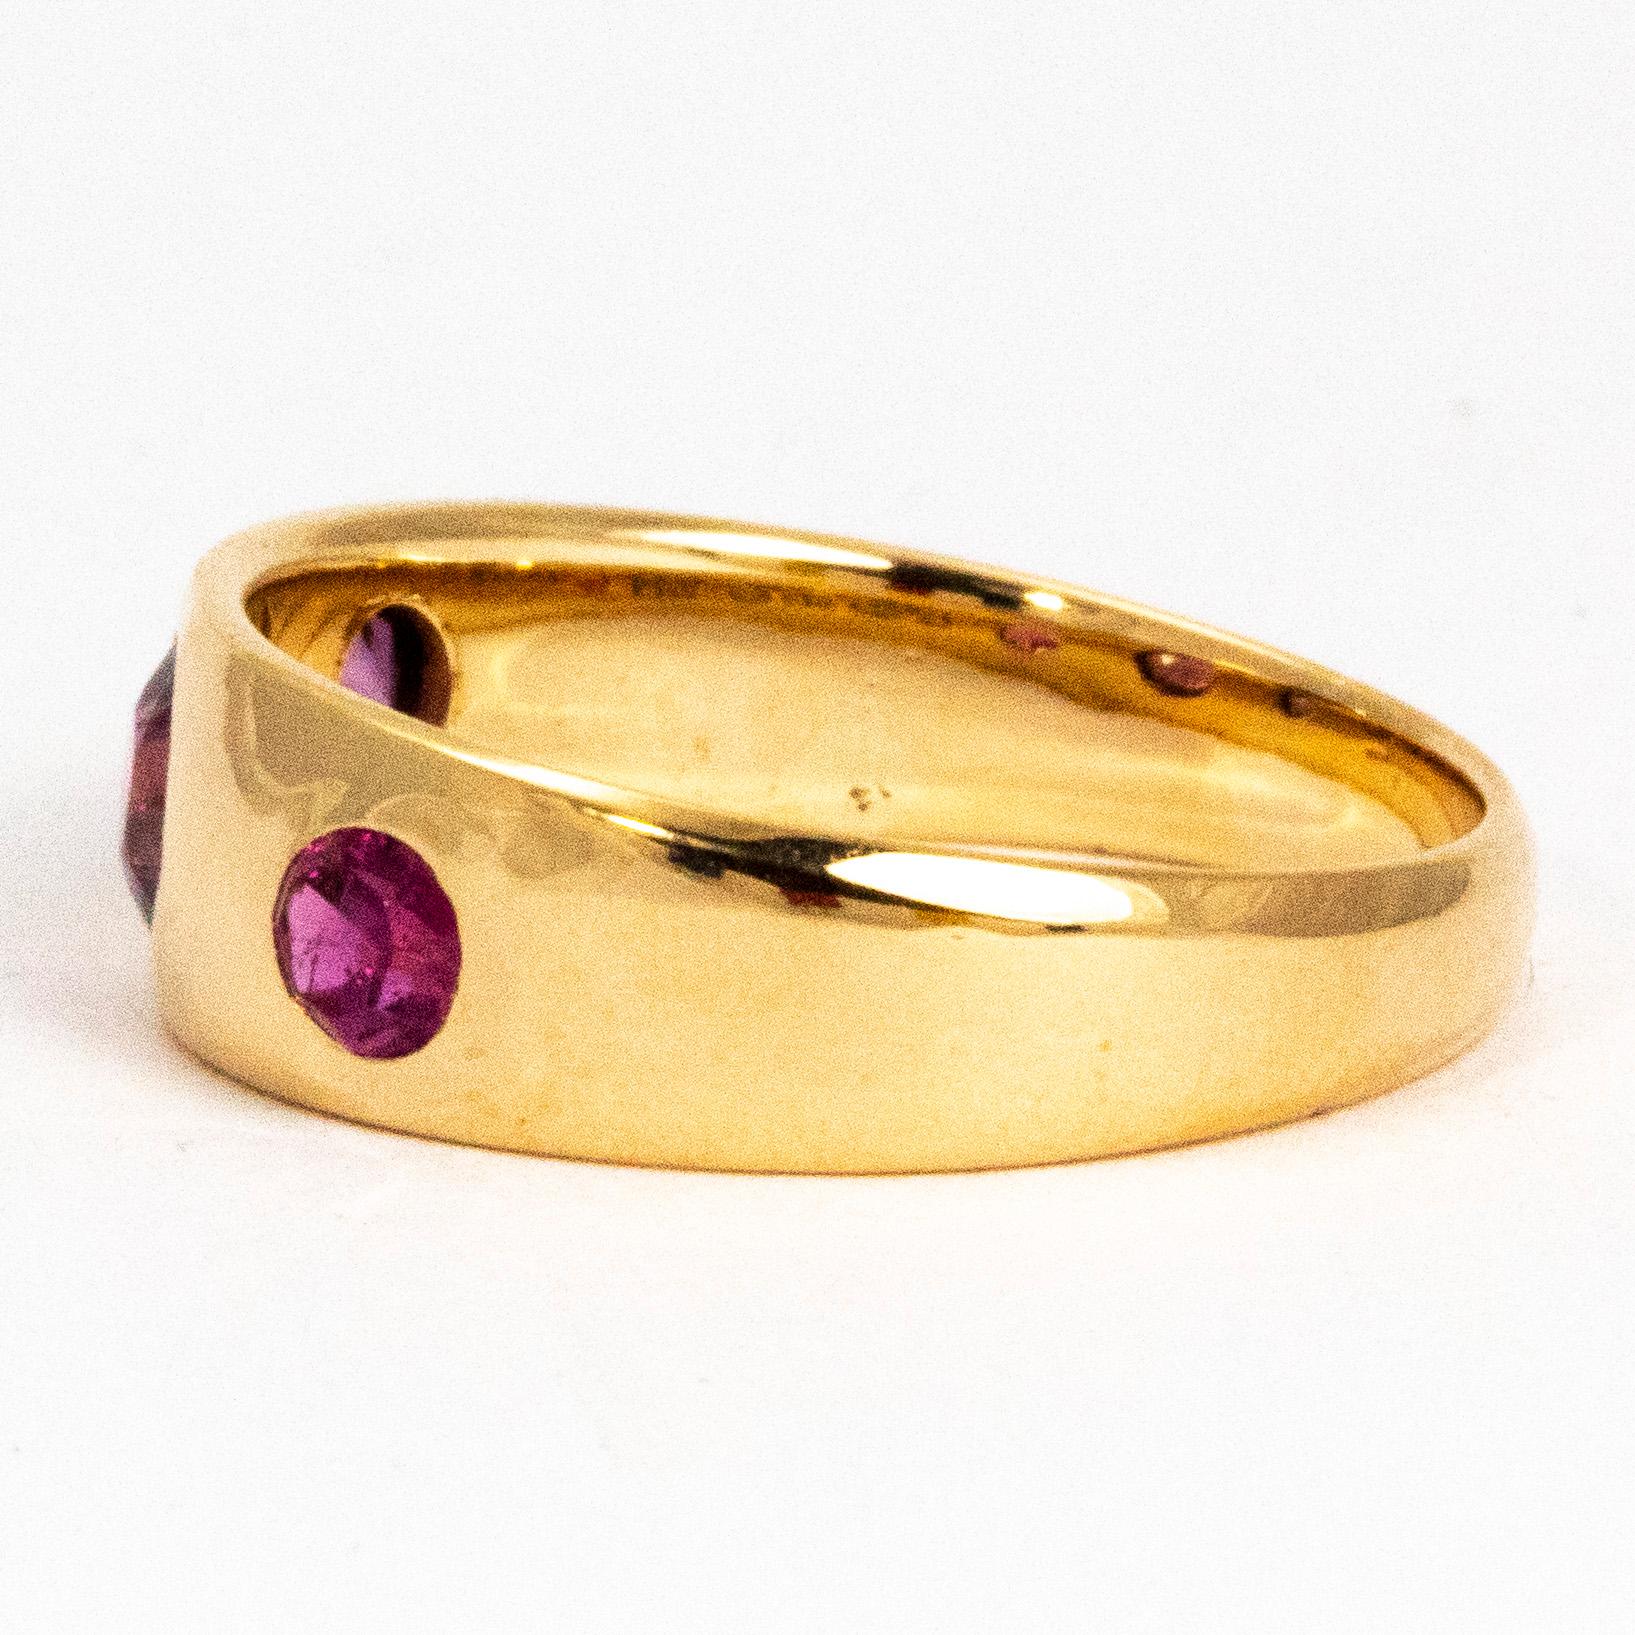 The three tourmaline stones that are set in this ring have a wonderful deep pink colour  and the 18 carat gold is beautifully glossy. The stones are sat perfectly flush within the gold band which give a clean silhouette to the ring. The centre stone